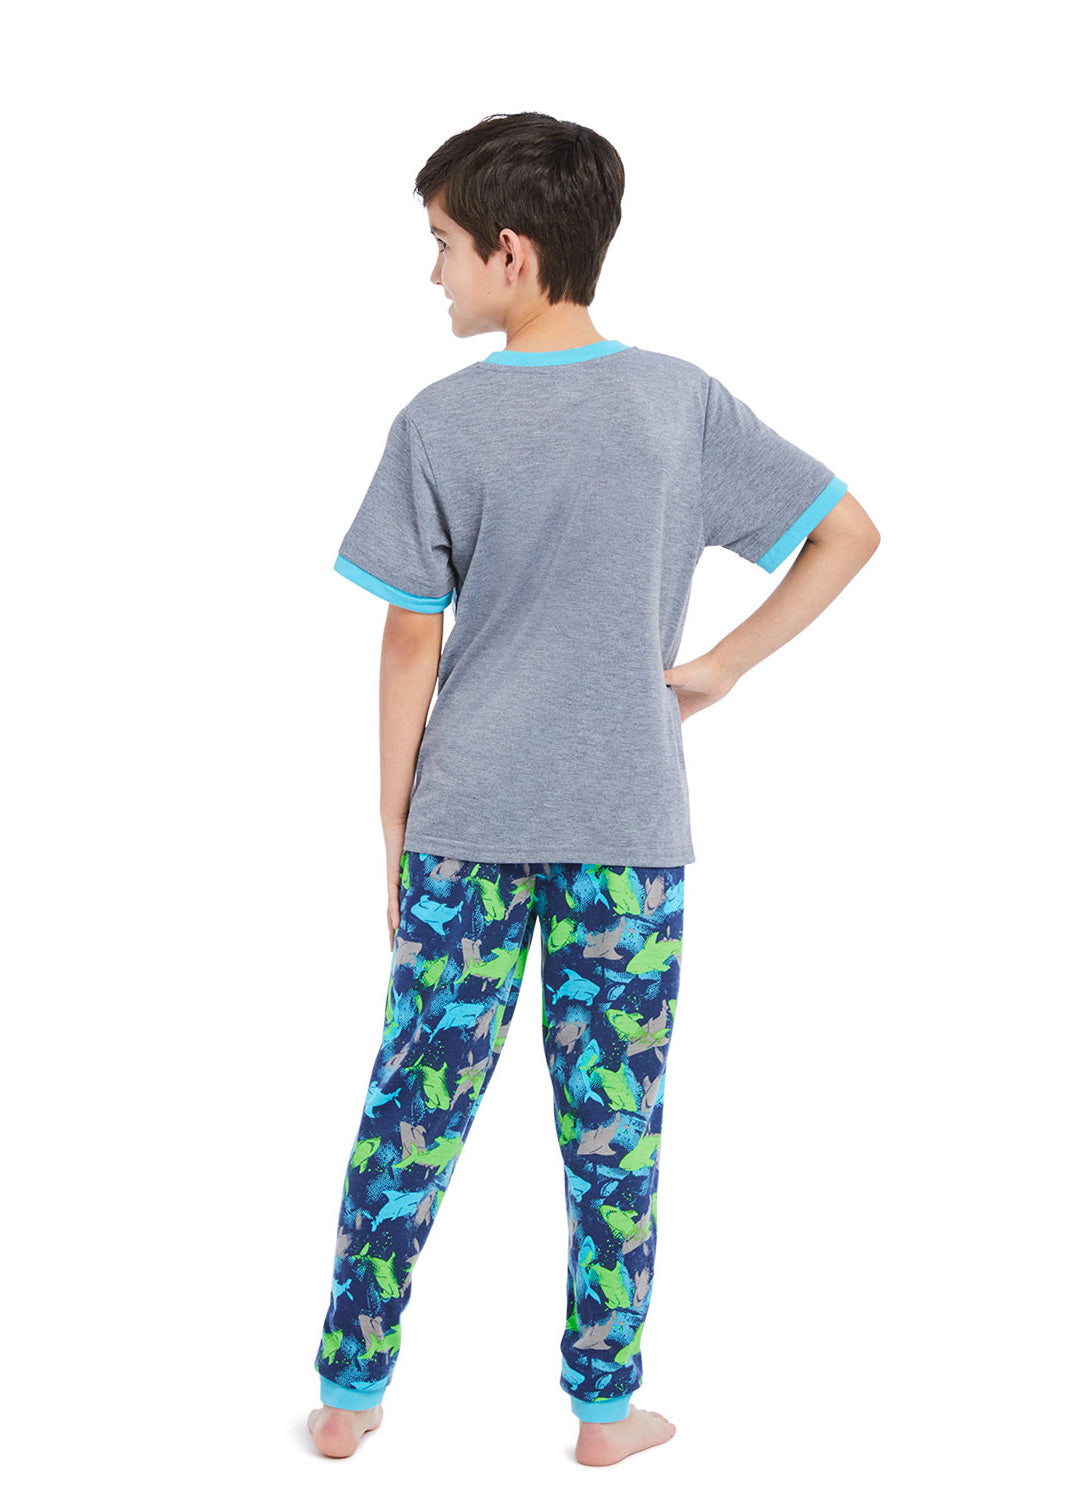 Back view Boy wearing Pajama set Shark, t-shirt (gray) with print and pants (blue) with prints